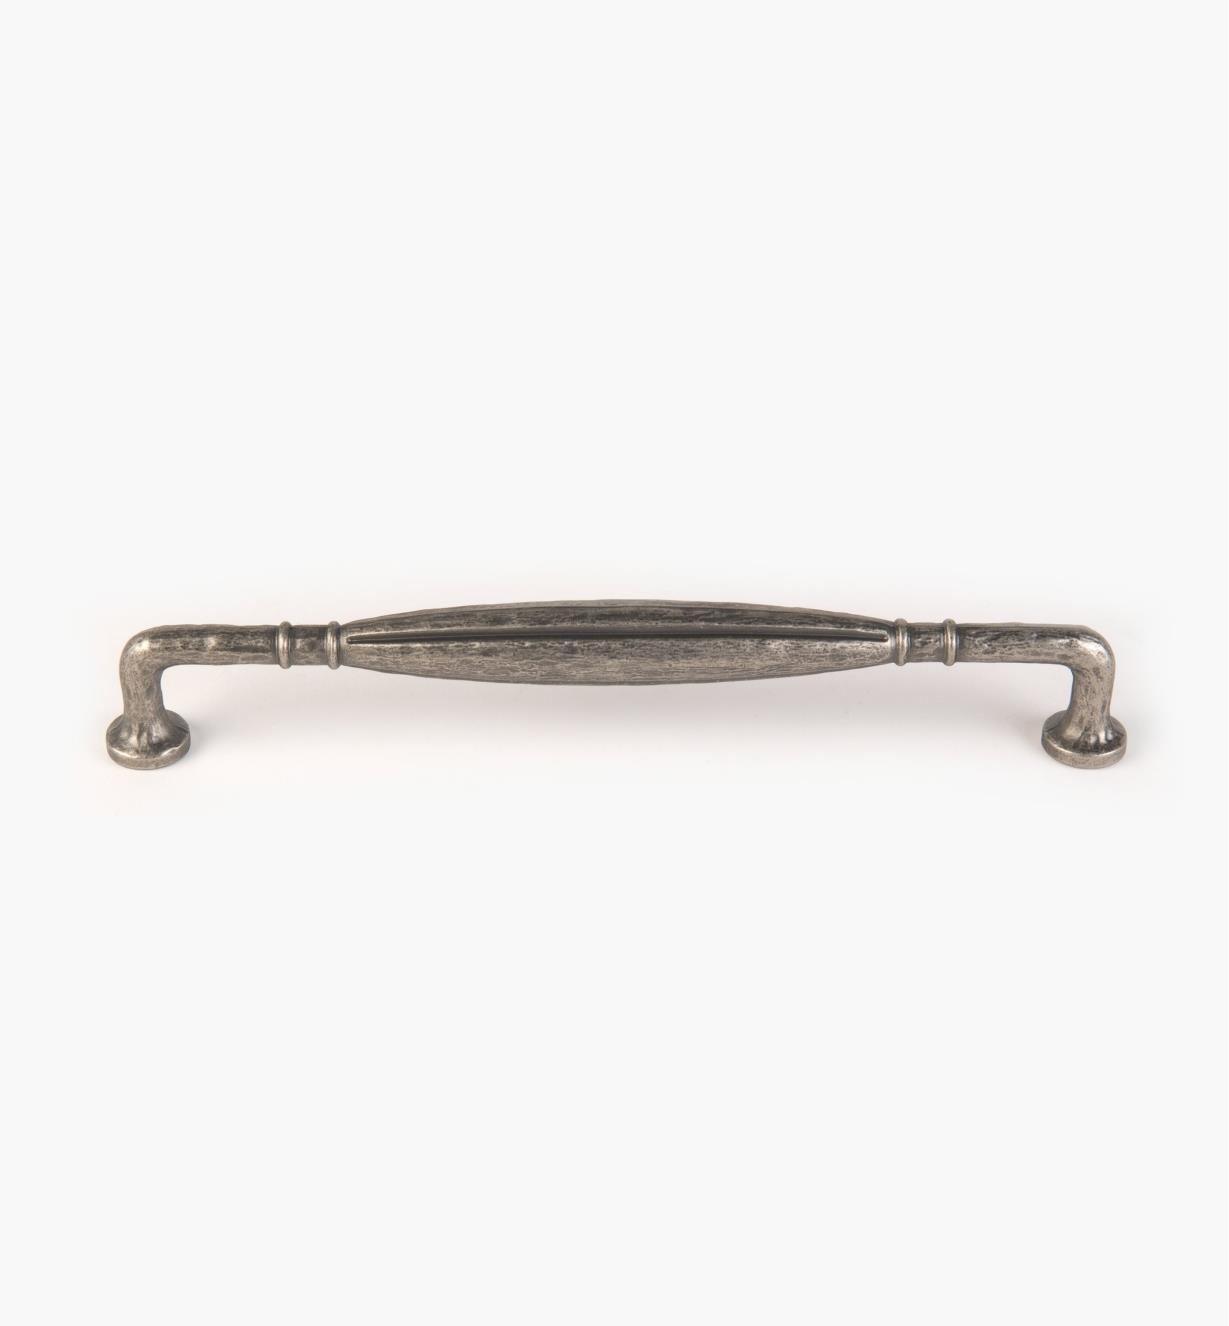 02A5185 - 8" Classic Siena Weathered Nickel Handle, each